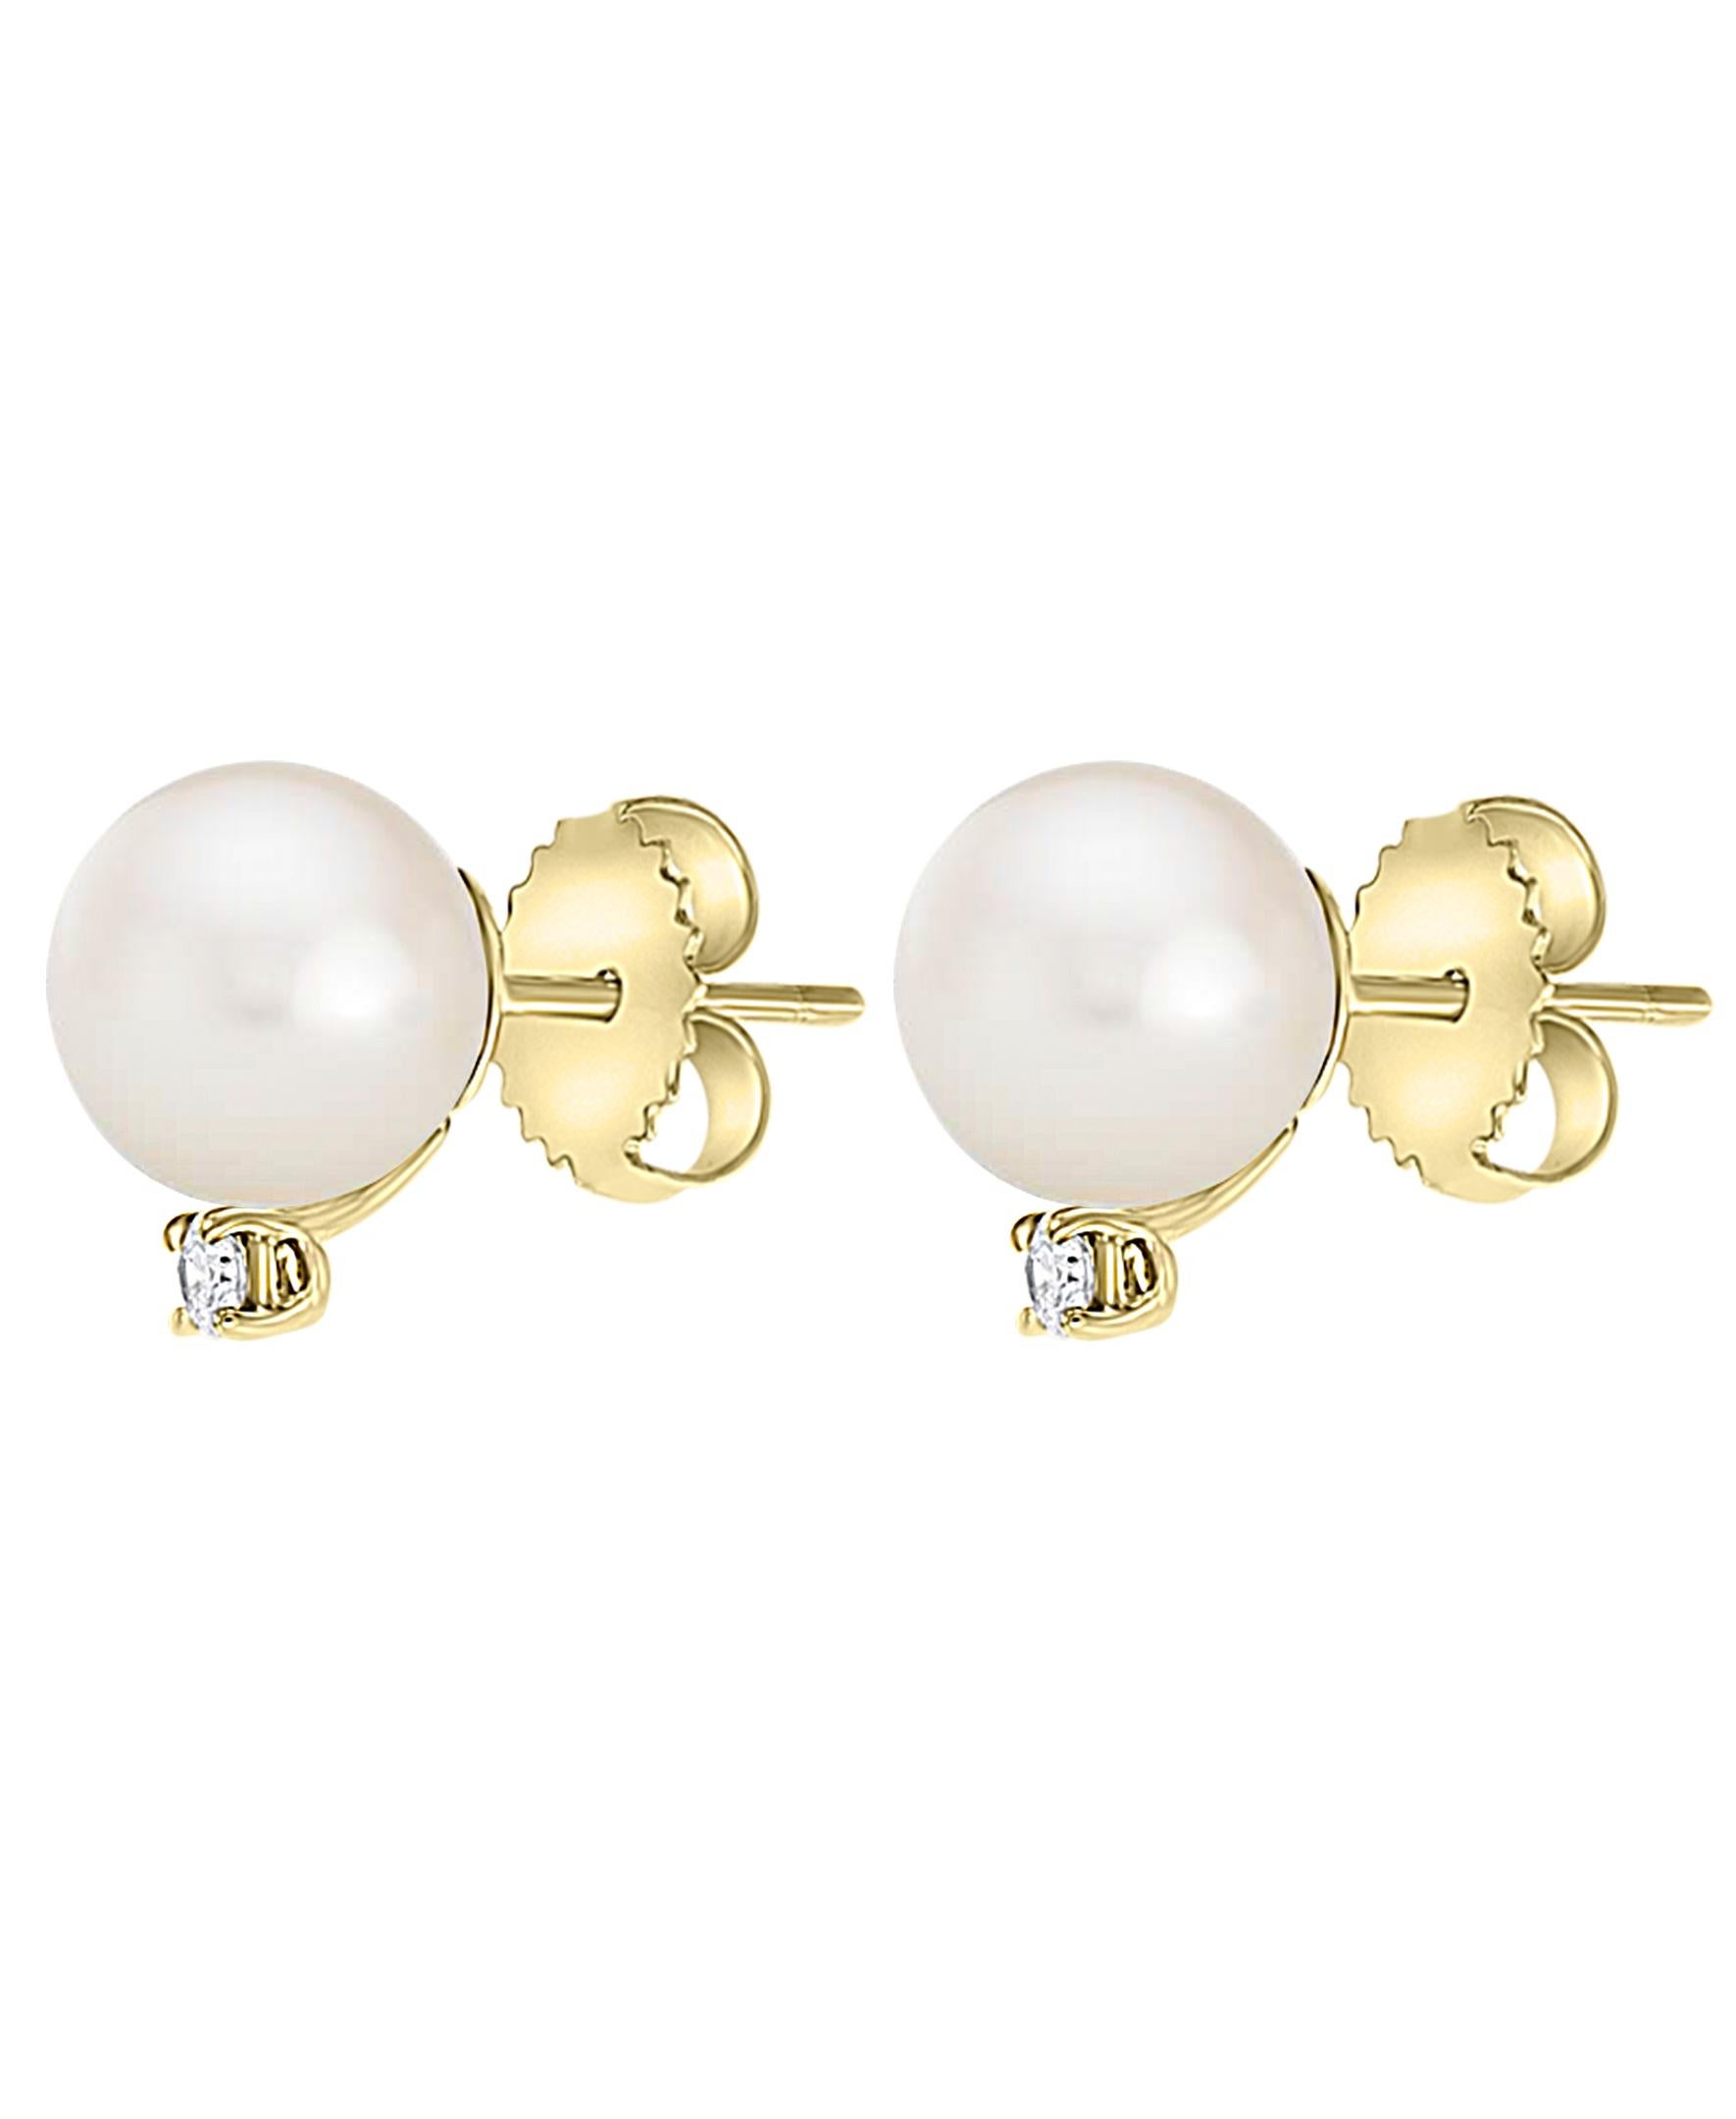 These elegant stud earrings feature Japanese Akoya cultured pearls set above sparkling diamonds in yellow gold. This sharp yet contemporary look makes the perfect complement to your work outfit or for a night out on the town.
-14K yellow gold
-Total